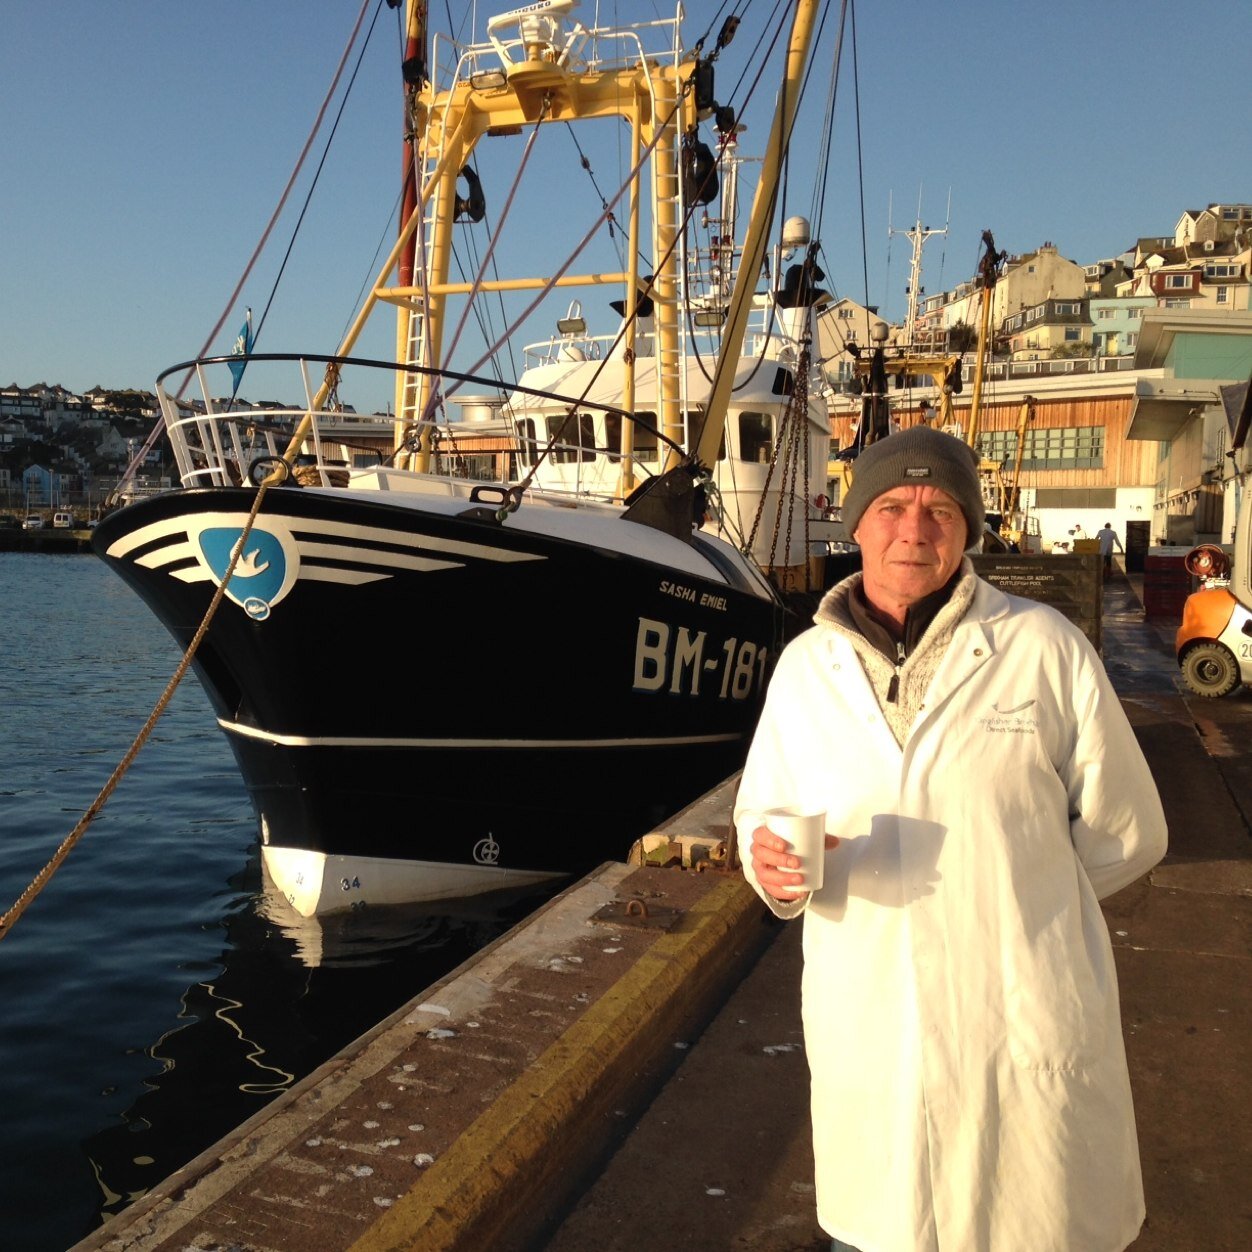 Supplier of the finest fresh fish to the finest of restaurants from Brixham day boats and Kingfisher Brixham.